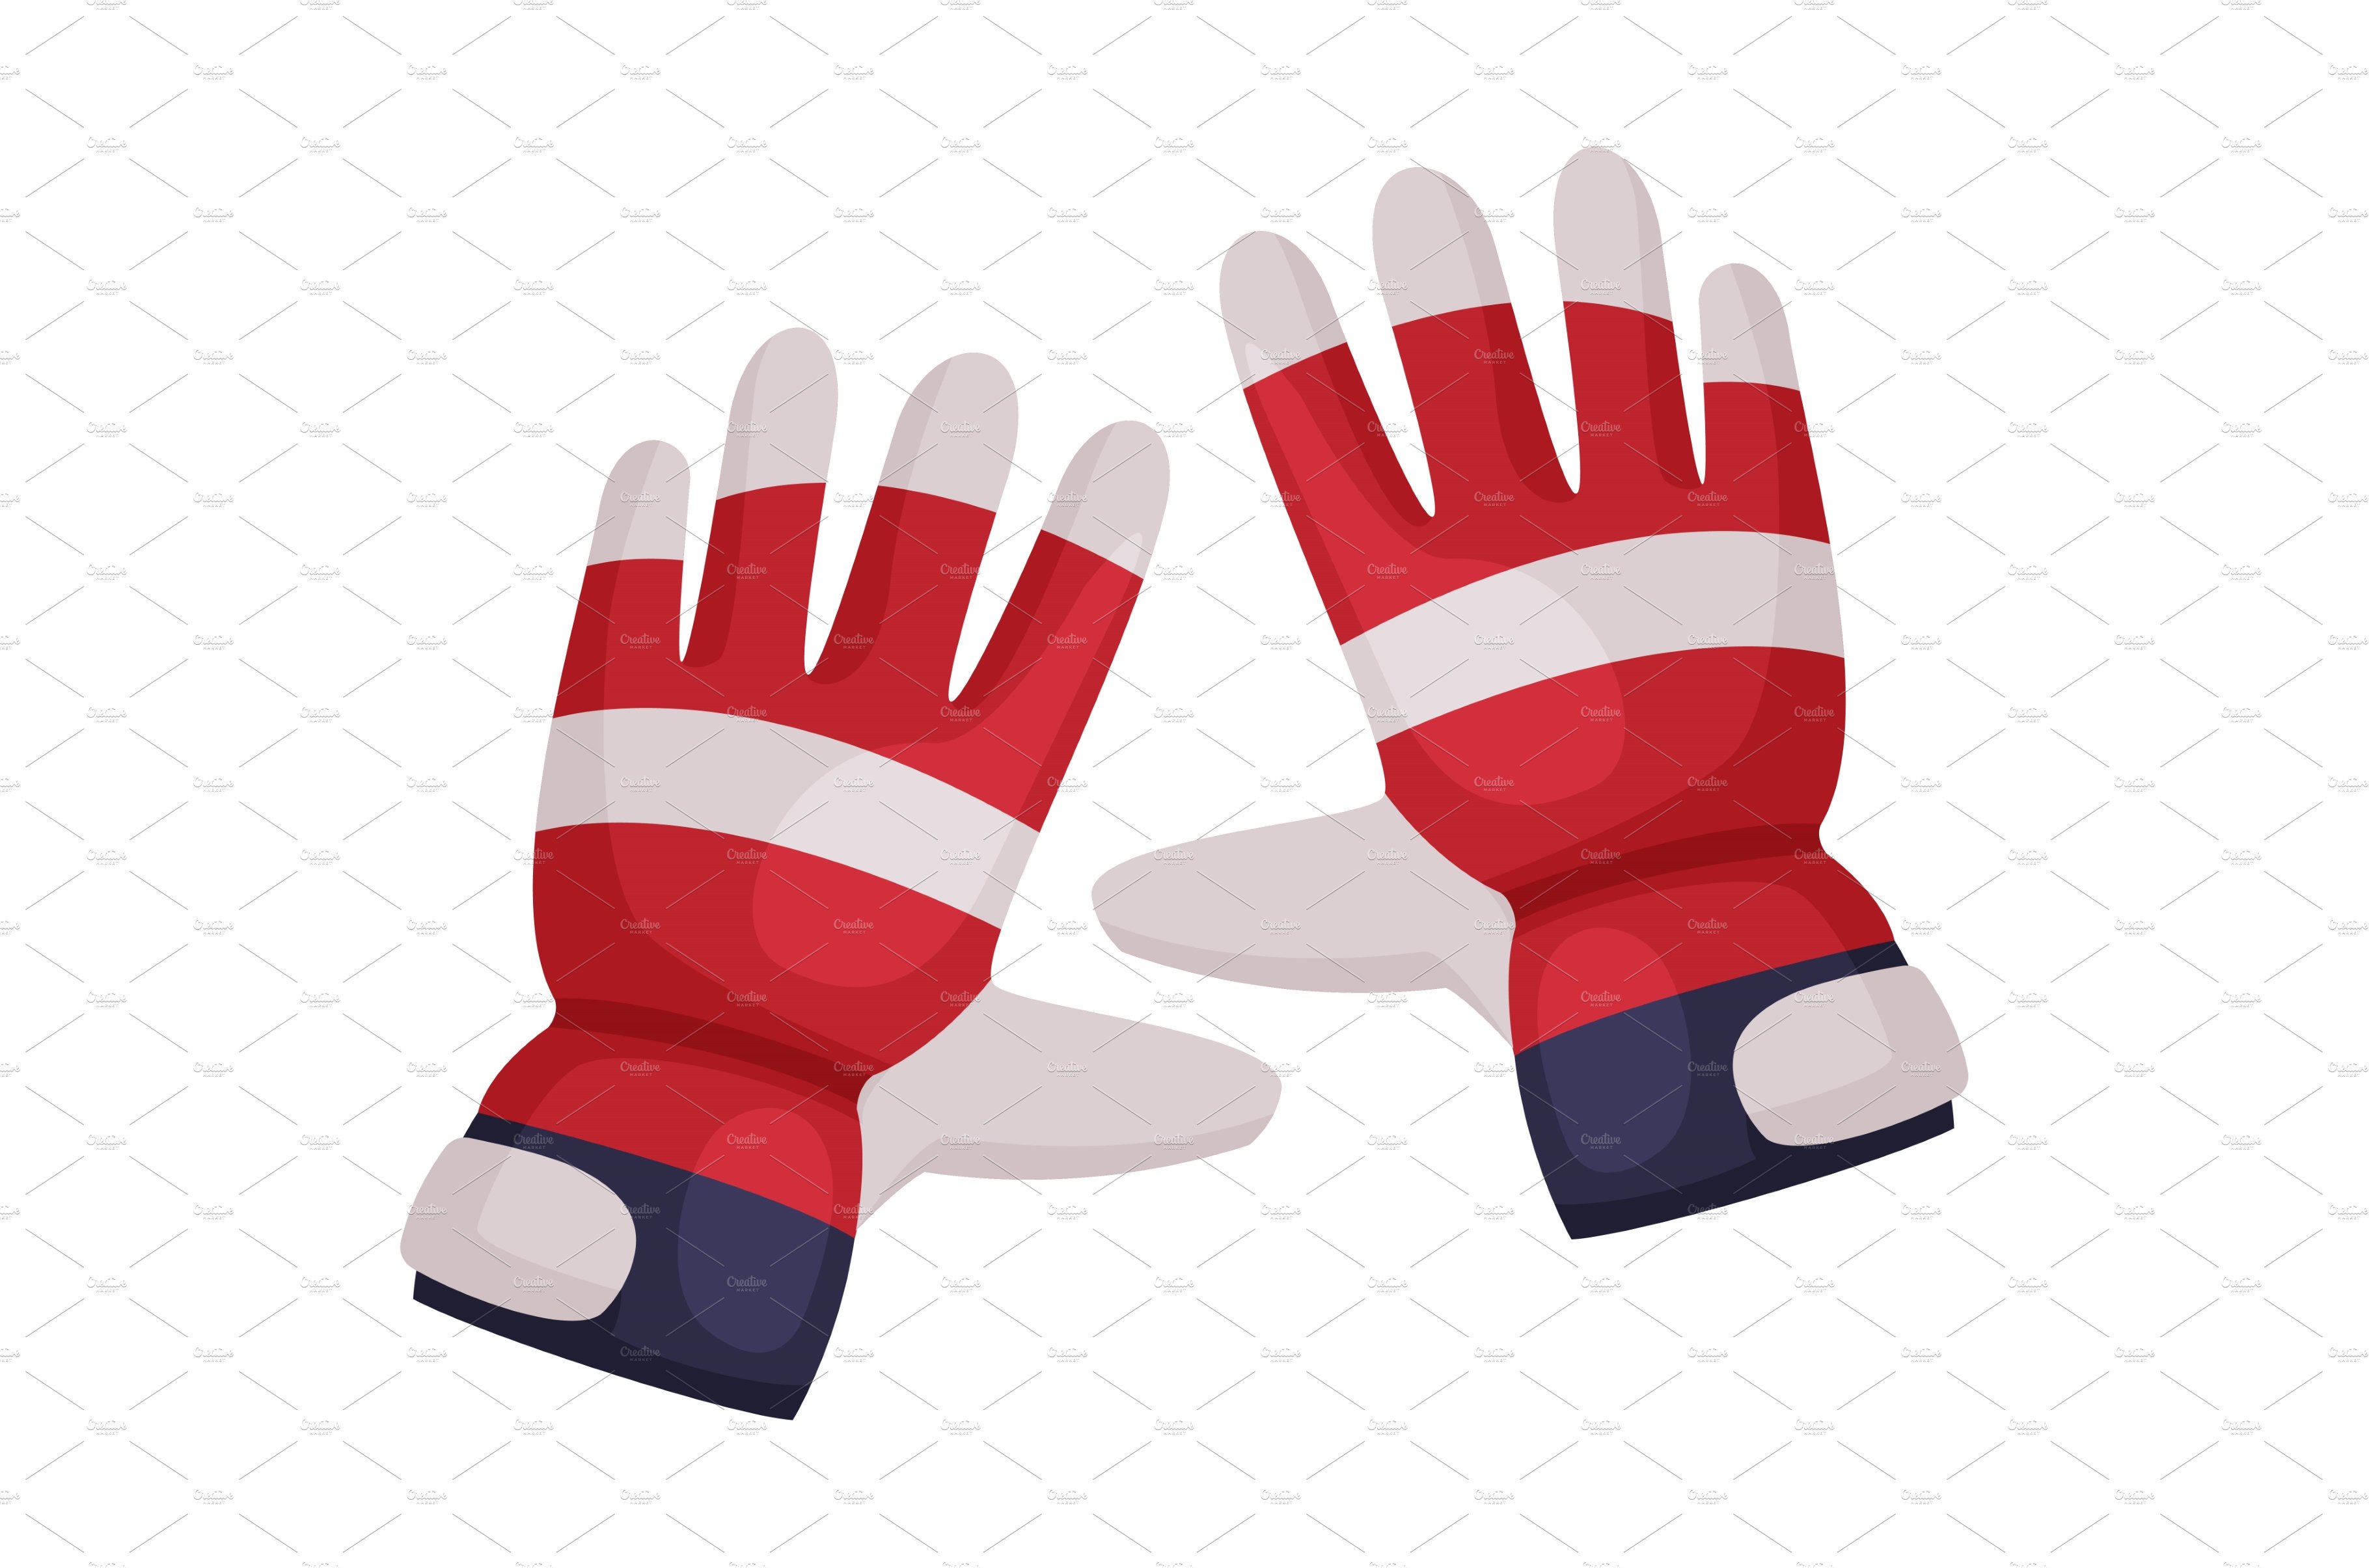 Protective Work Gloves Isolated on cover image.